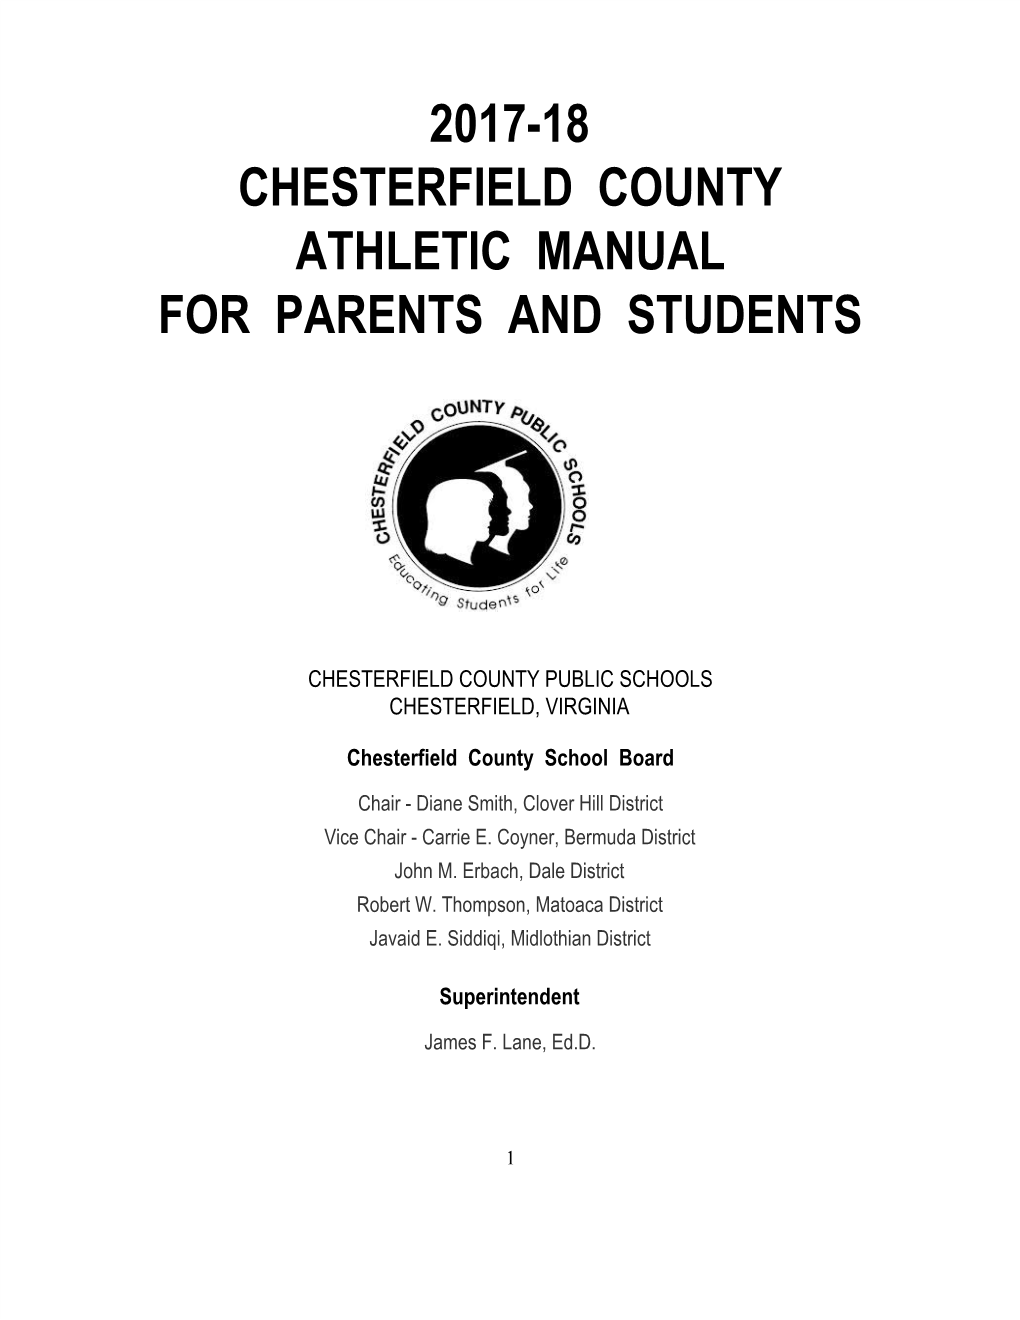 2017-18 Chesterfield County Athletic Manual For